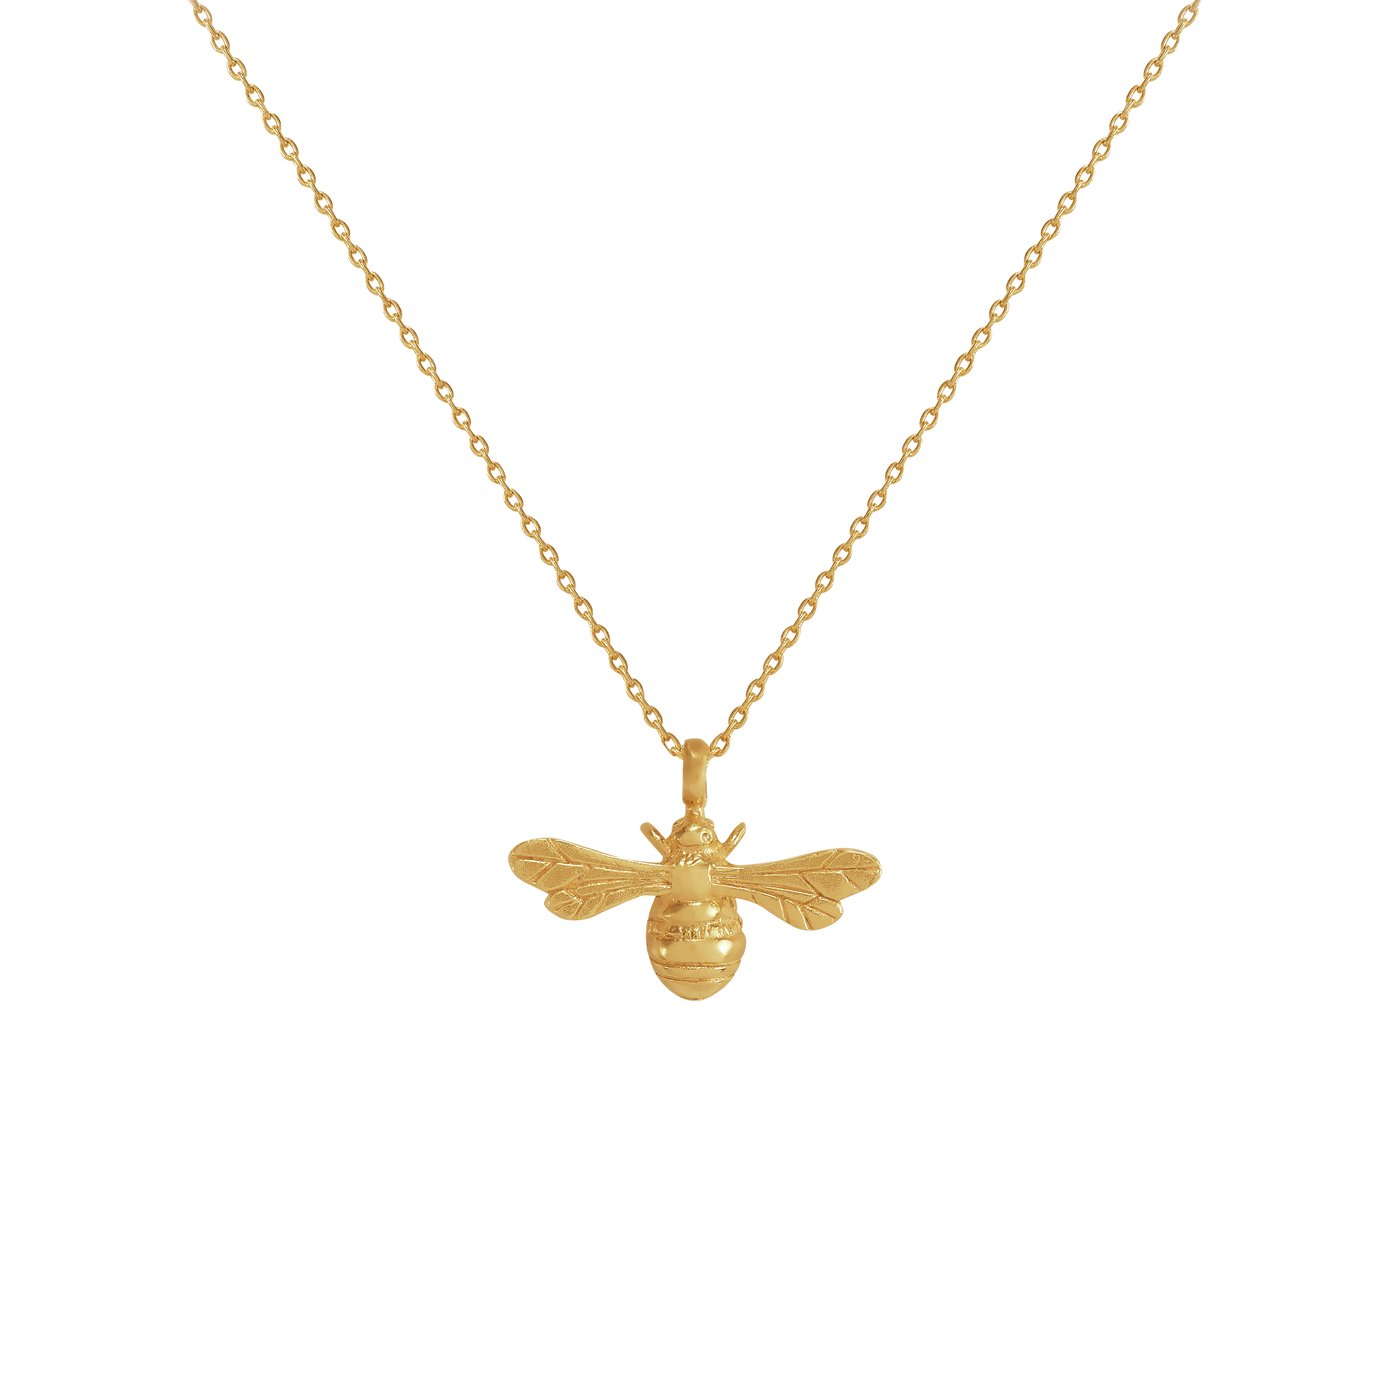 Revere 9ct Gold Plated Sterling Silver Bee Pendant Necklace